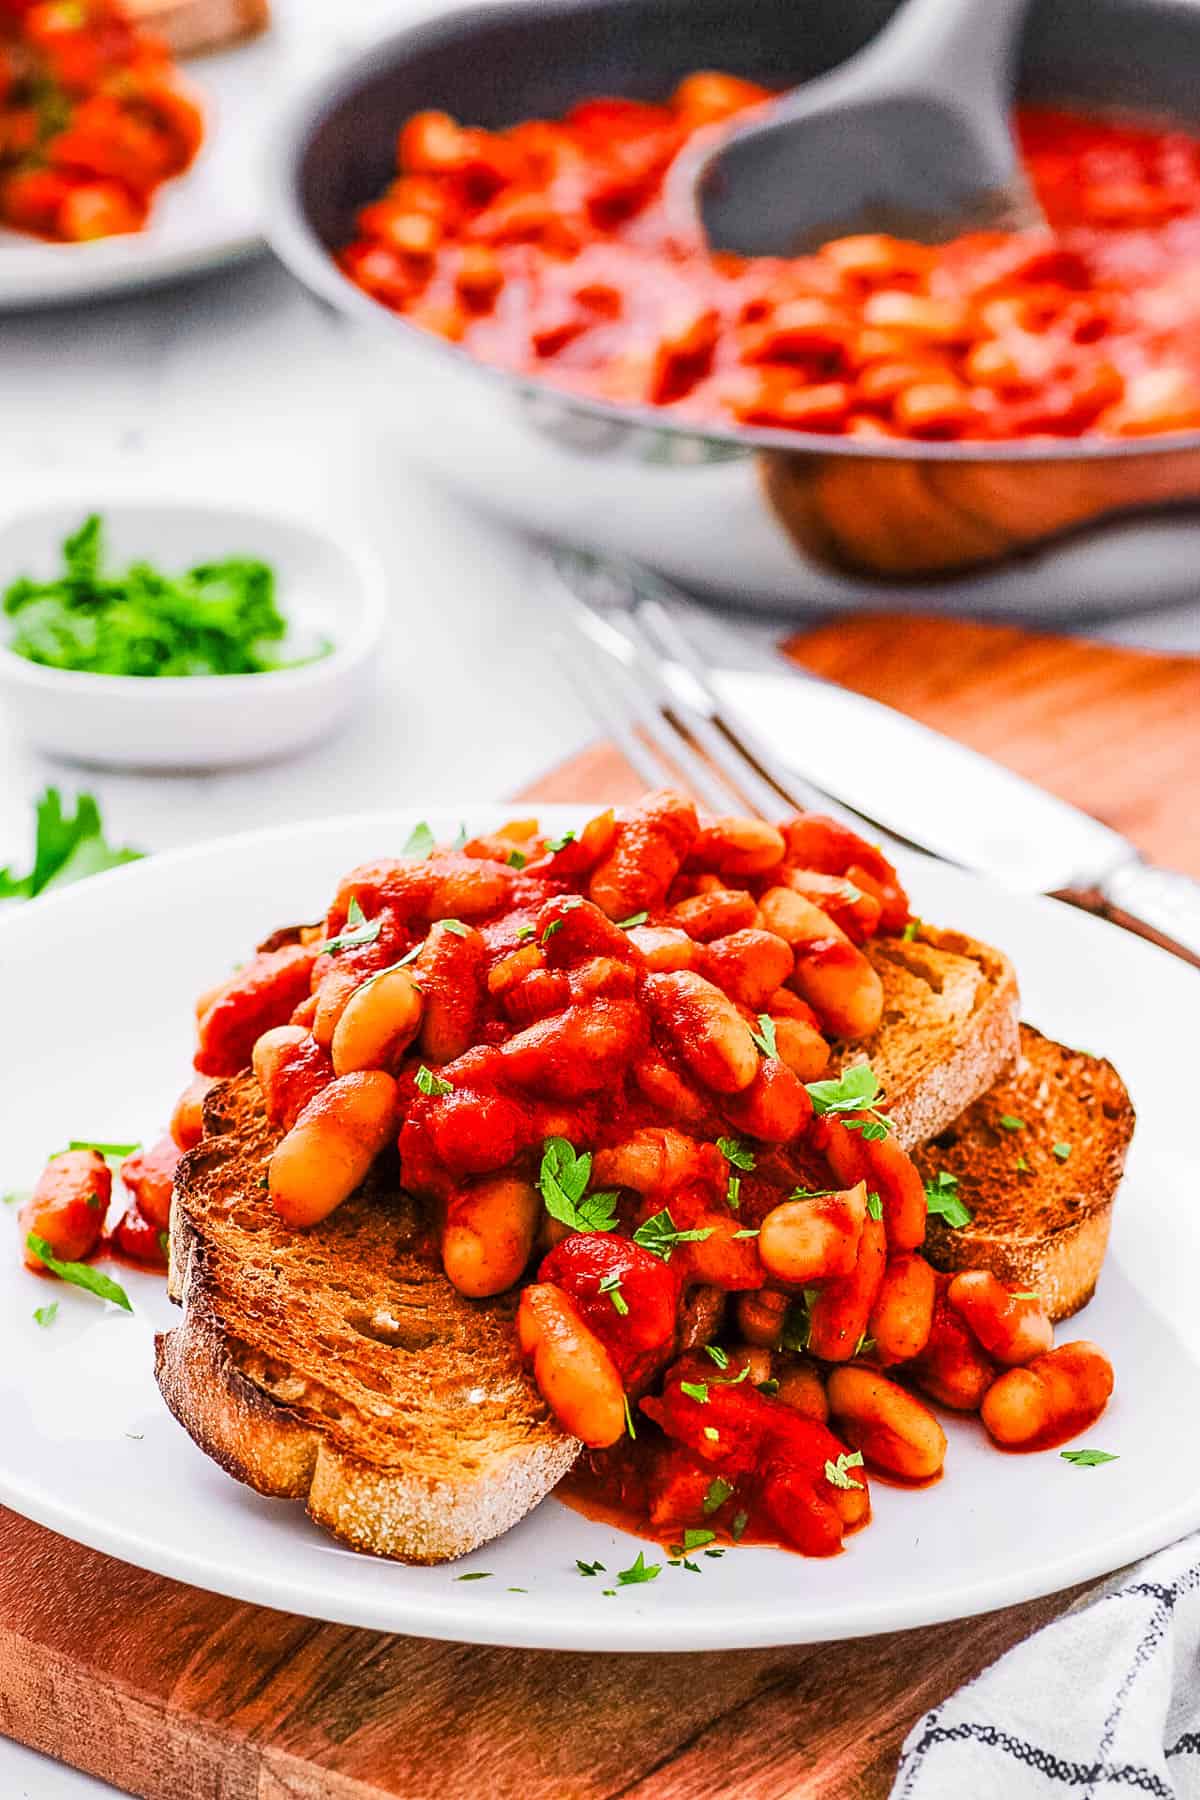 Vegetarian baked beans on toast served on a white plate.